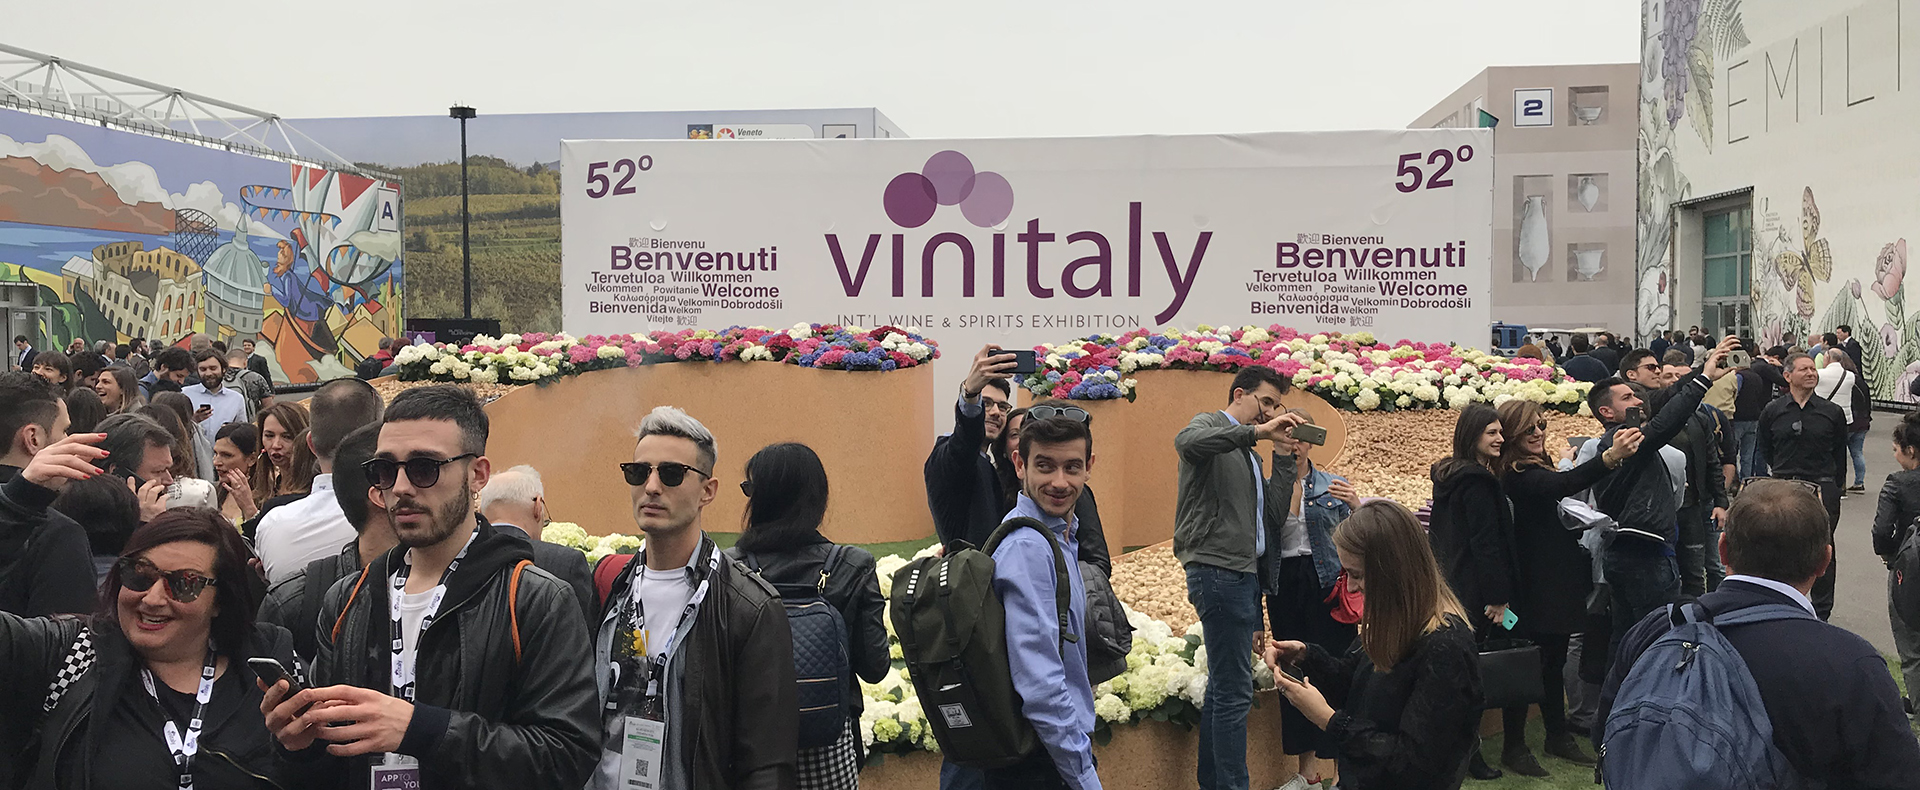 Prowein cancelled, Vinitaly postponed: The latest updates.